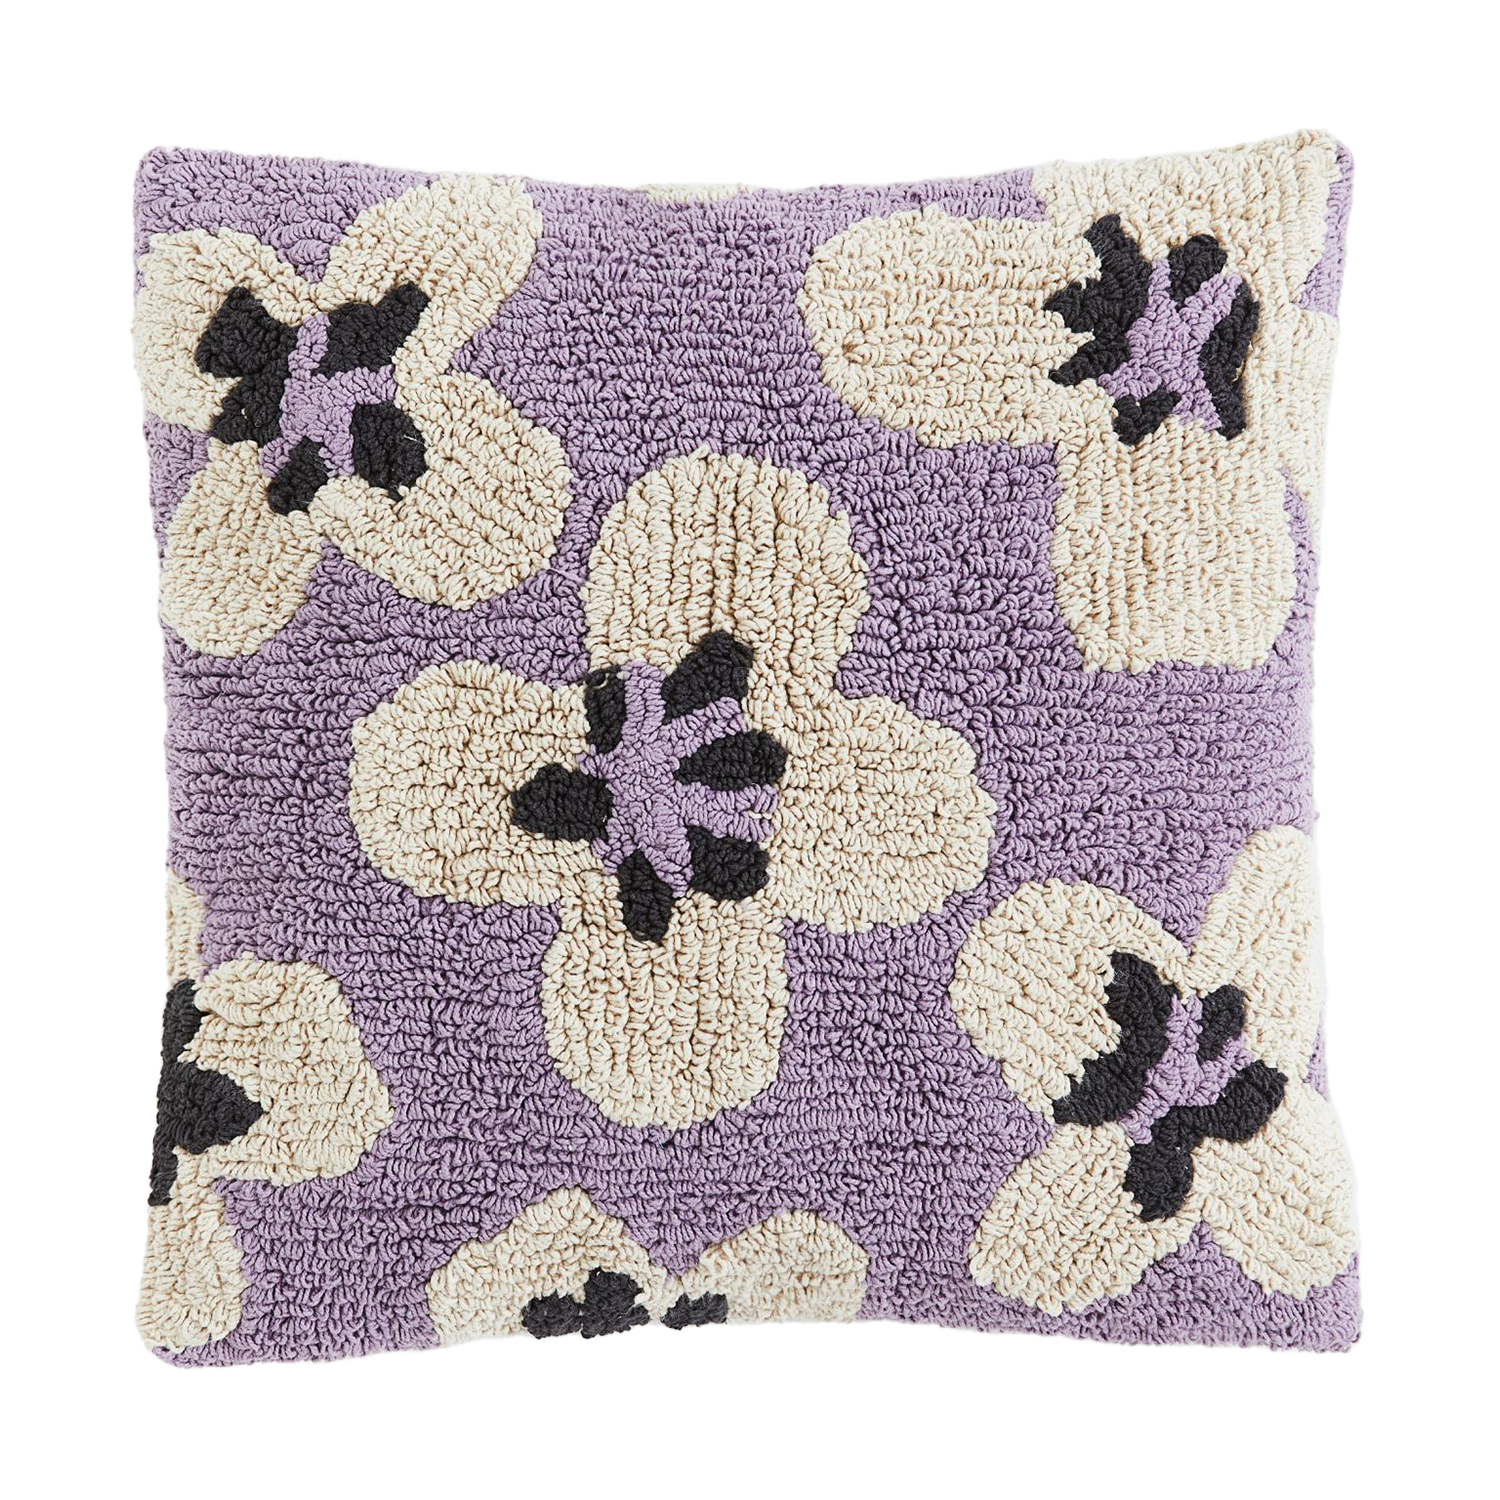 H&M Home Tufted Patterned Cushion Cover.